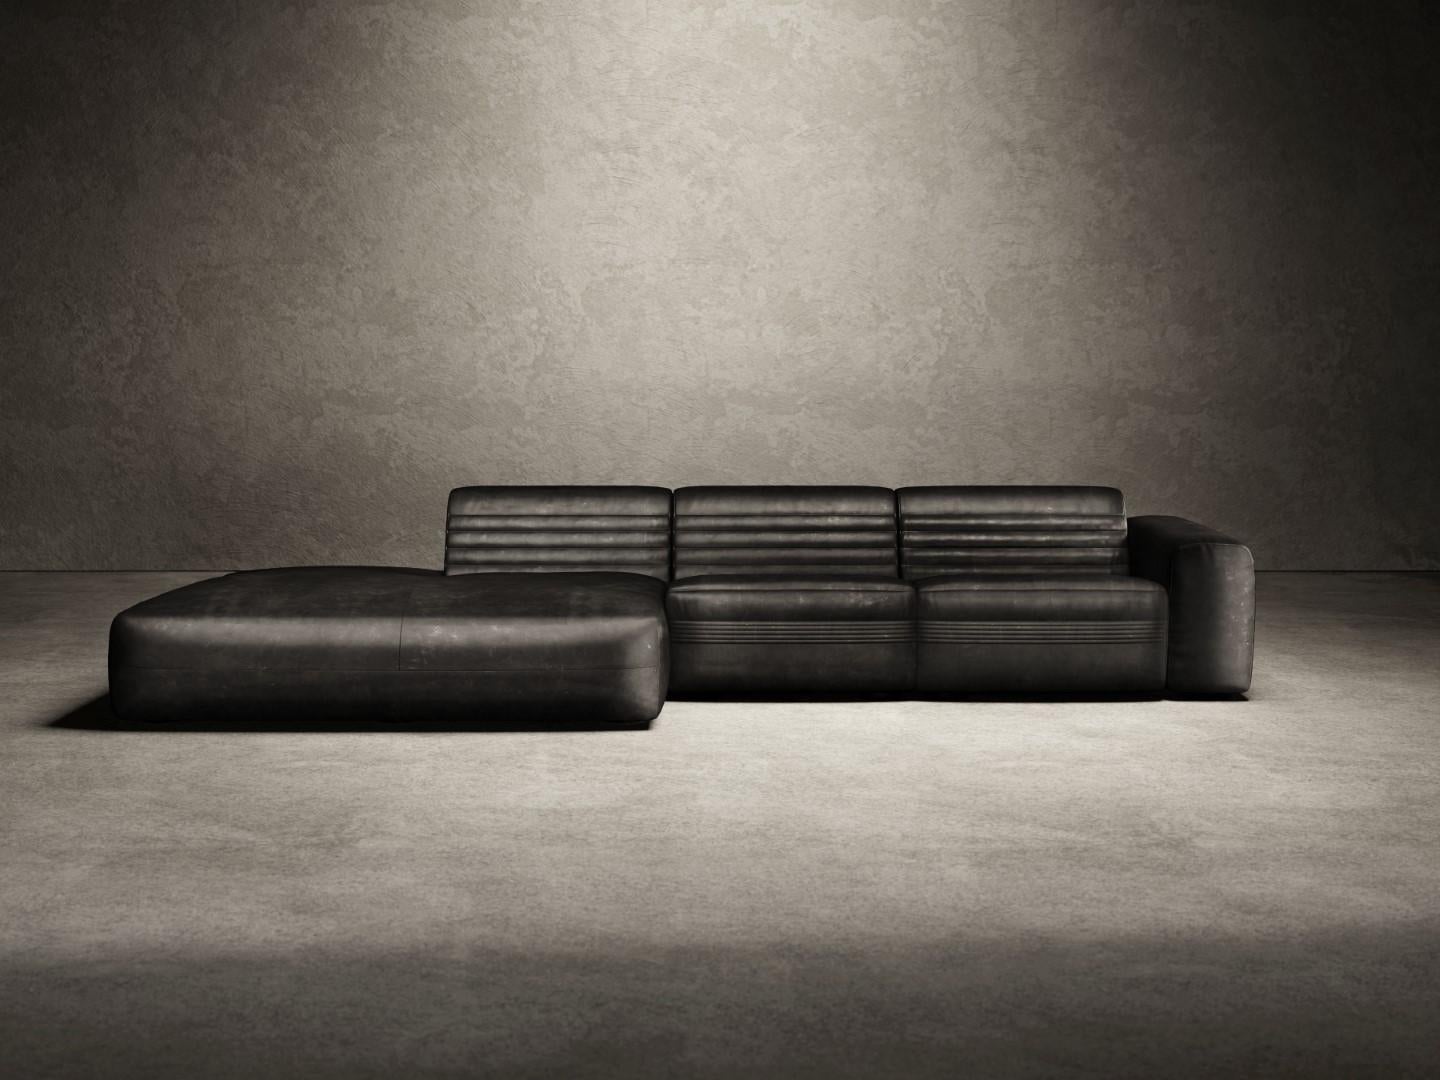 Vicious is a modular sofa composed of 4 modular elements: terminal module, central module, corner module and chaise longue. Vicious sofa is composed of a woode frame upholstered with high-density foamed polyurethane, and a top layer of goose down to